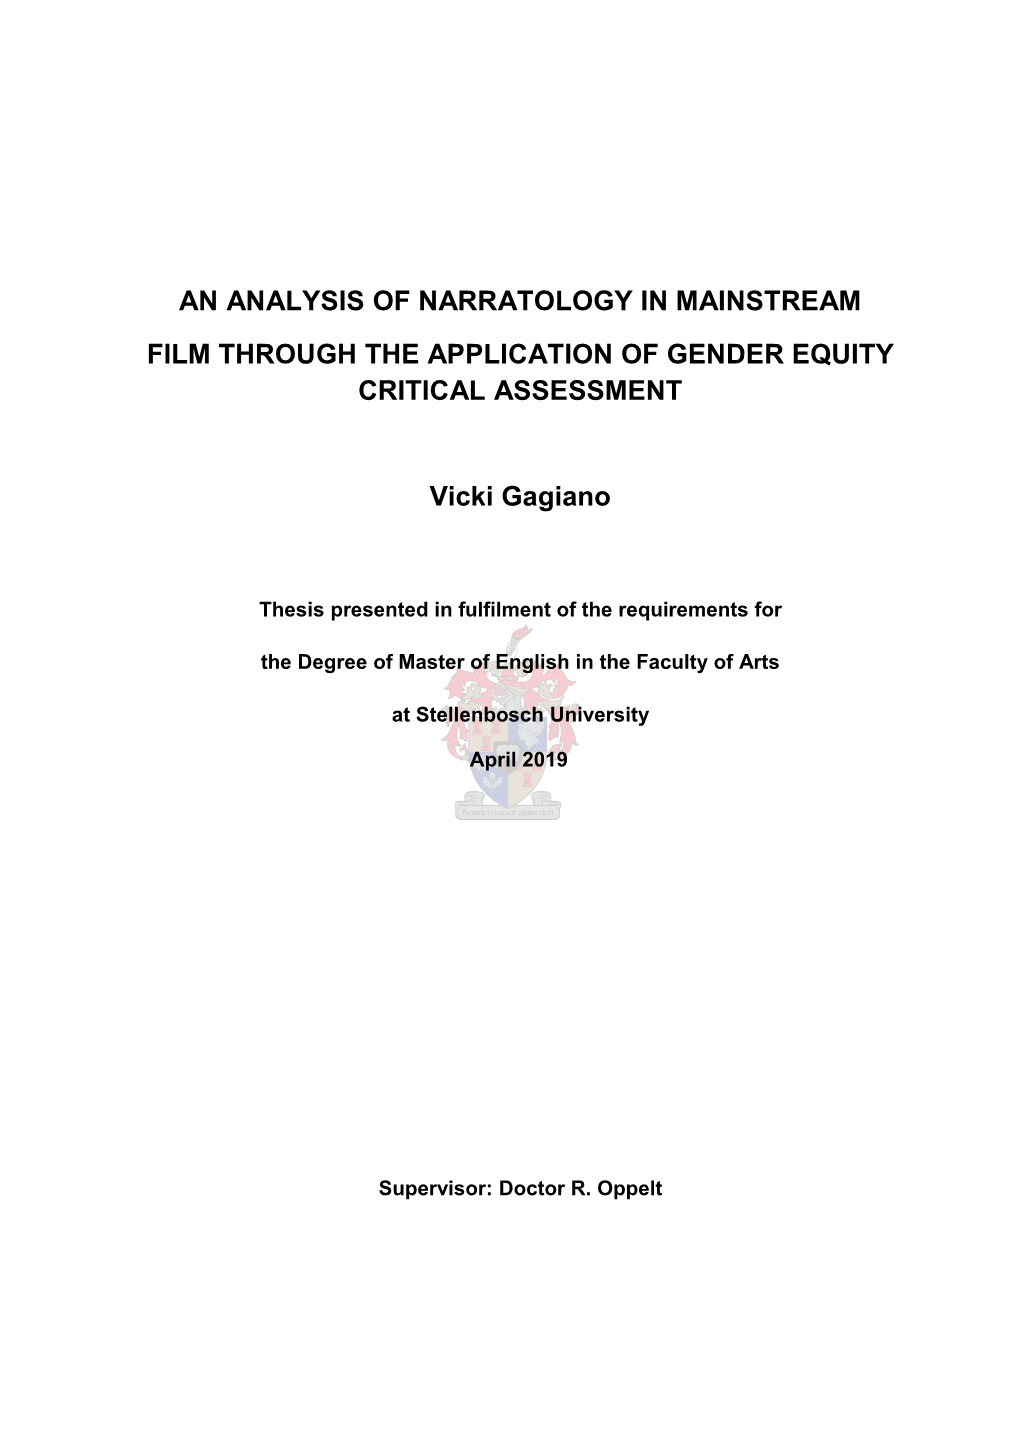 An Analysis of Narratology in Mainstream Film Through the Application of Gender Equity Critical Assessment